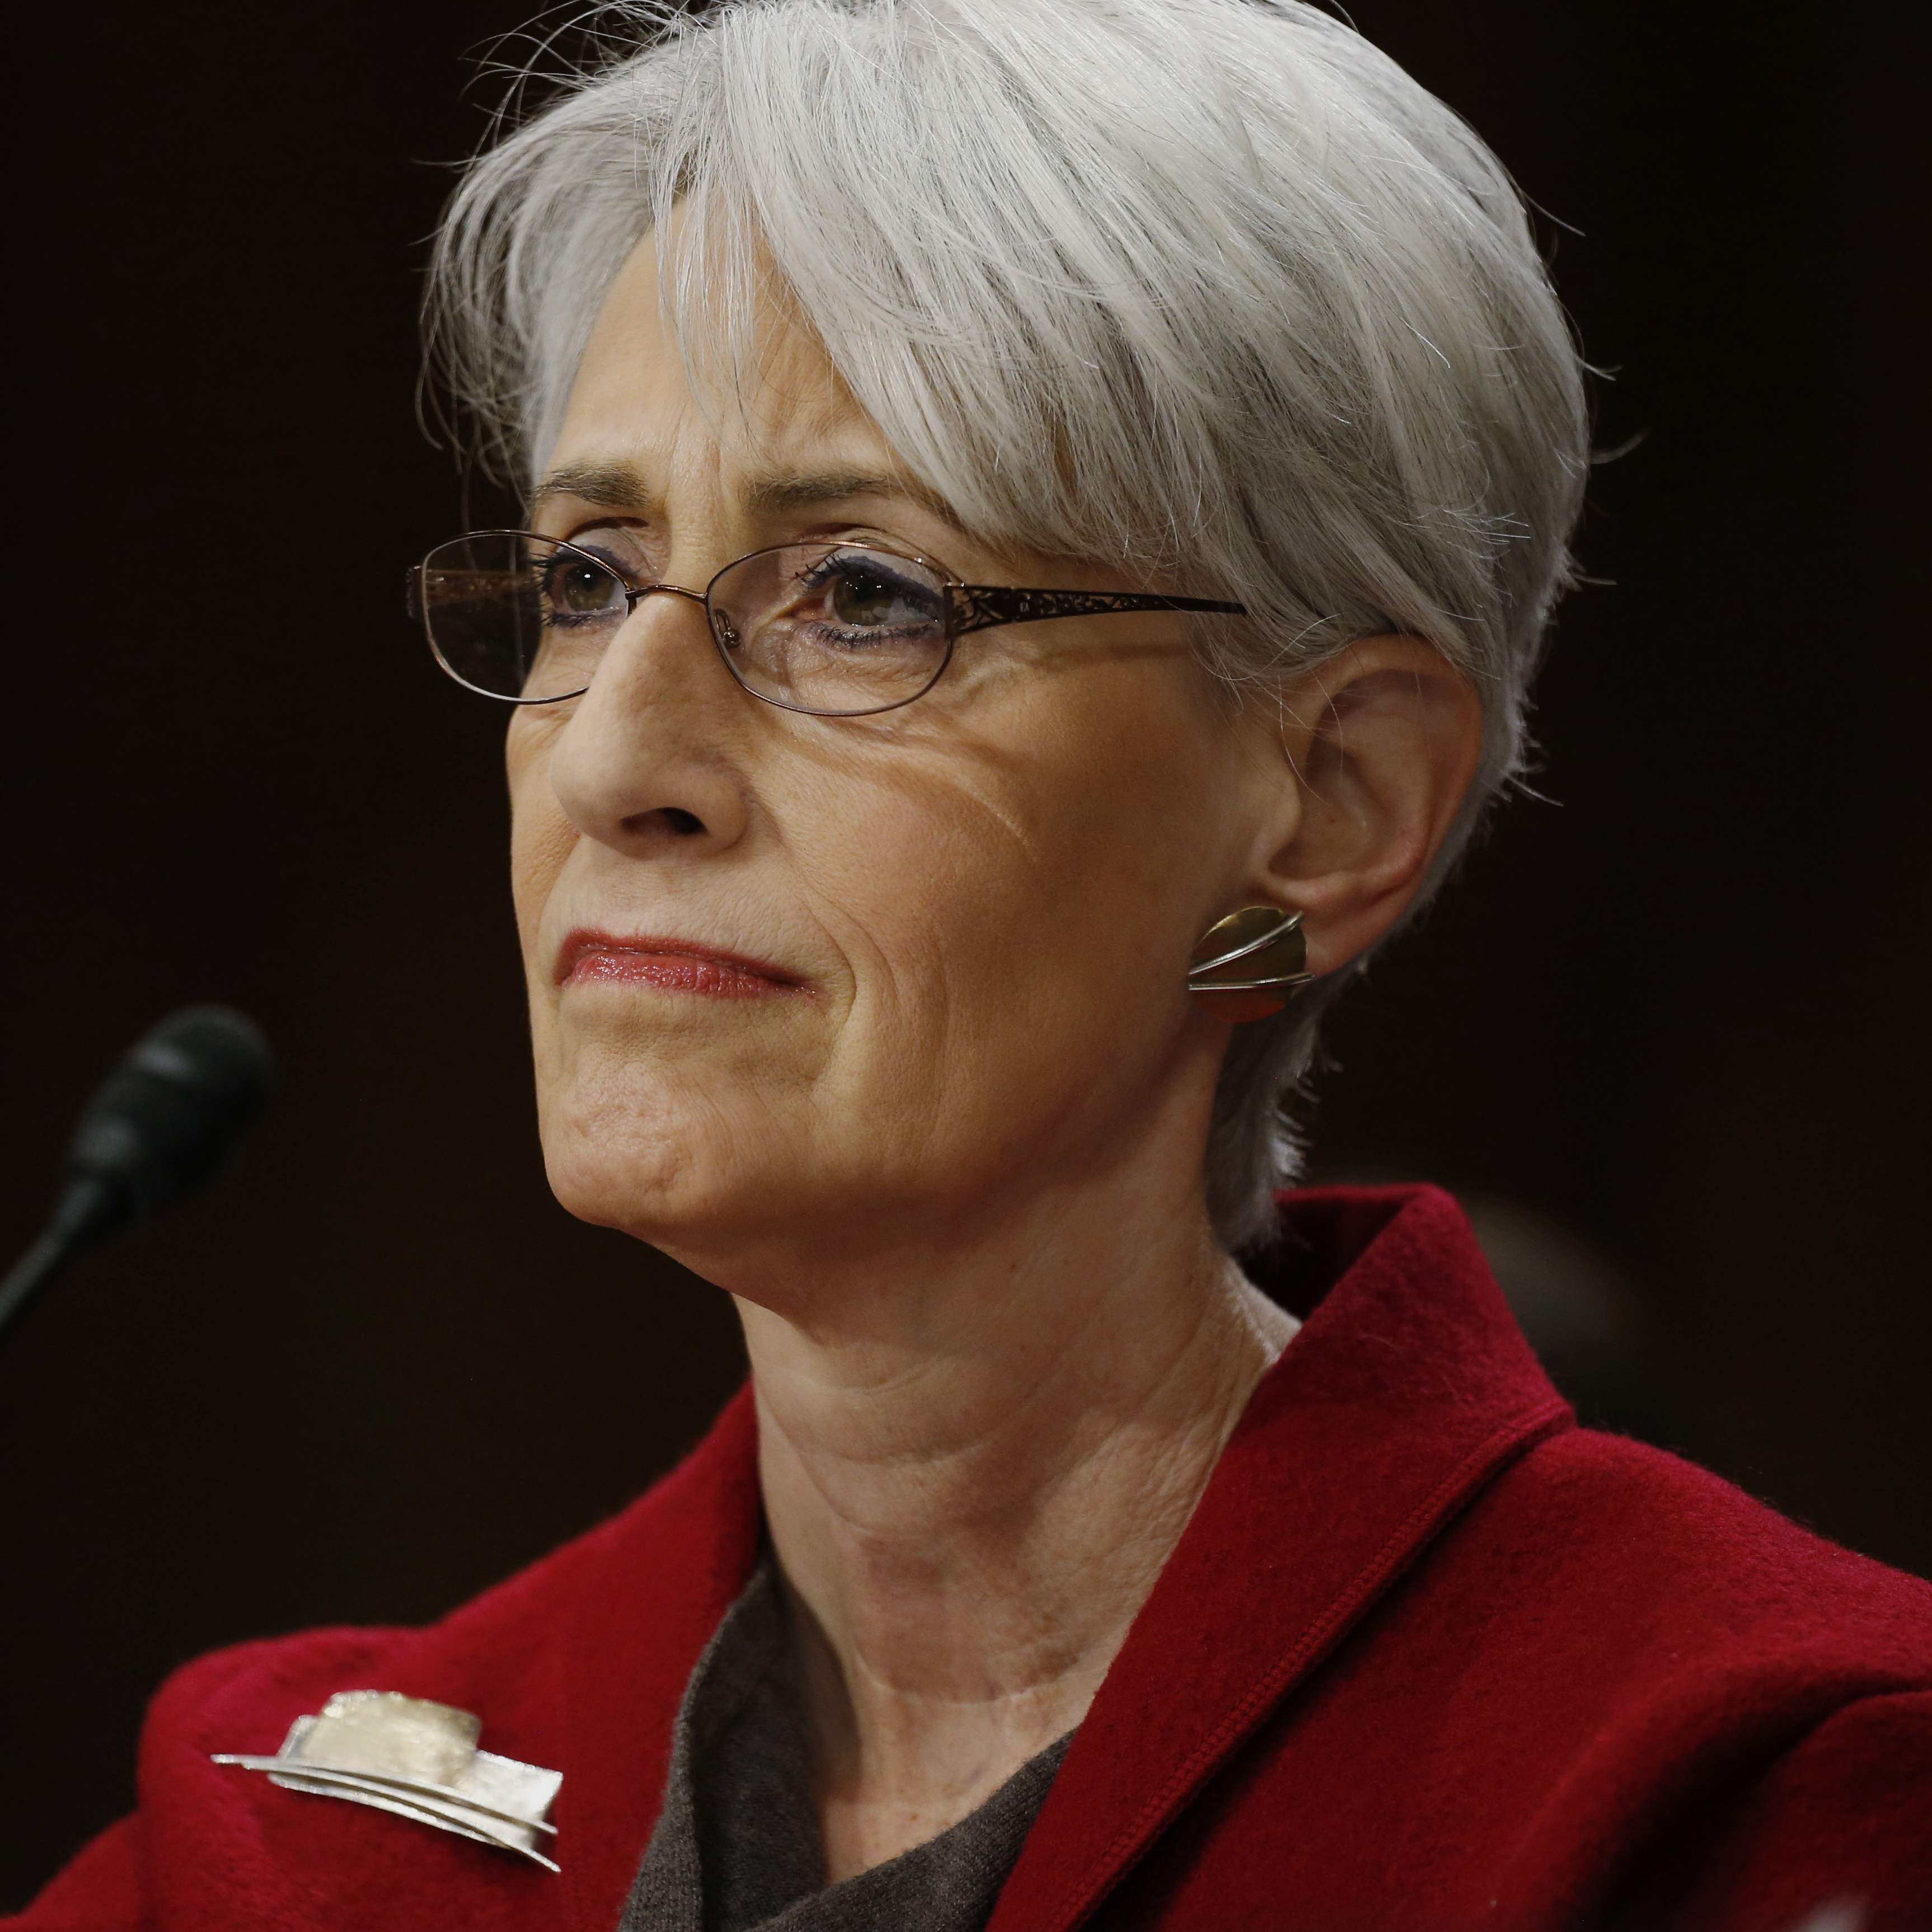 Undersecretary of State for Political Affairs Wendy Sherman testifies before the Senate Foreign Relations Committee in 2014. Sherman was the lead U.S. negotiator on the Iran nuclear deal. She stepped down from her post last week and is now teaching at Harvard. (Photo by Charles Dharapak/AP)